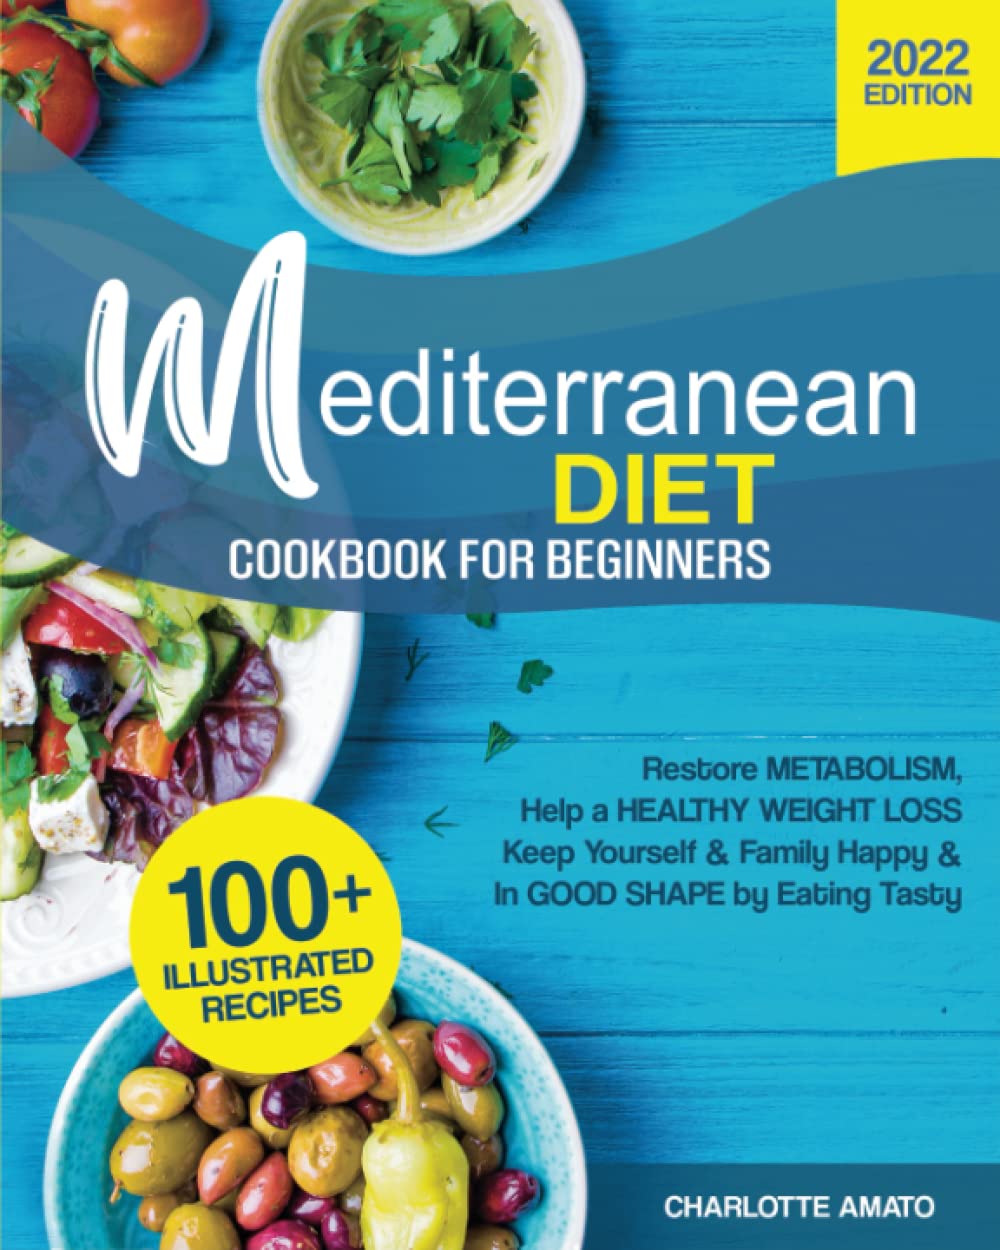 Mediterranean Diet Cookbook for Beginners: 100+ Illustrated, Quick & Easy Recipes to Restore Metabolism, Help a Healthy Weight Loss, Keep Yourself & Family Happy & In Good Shape by Eating Tasty